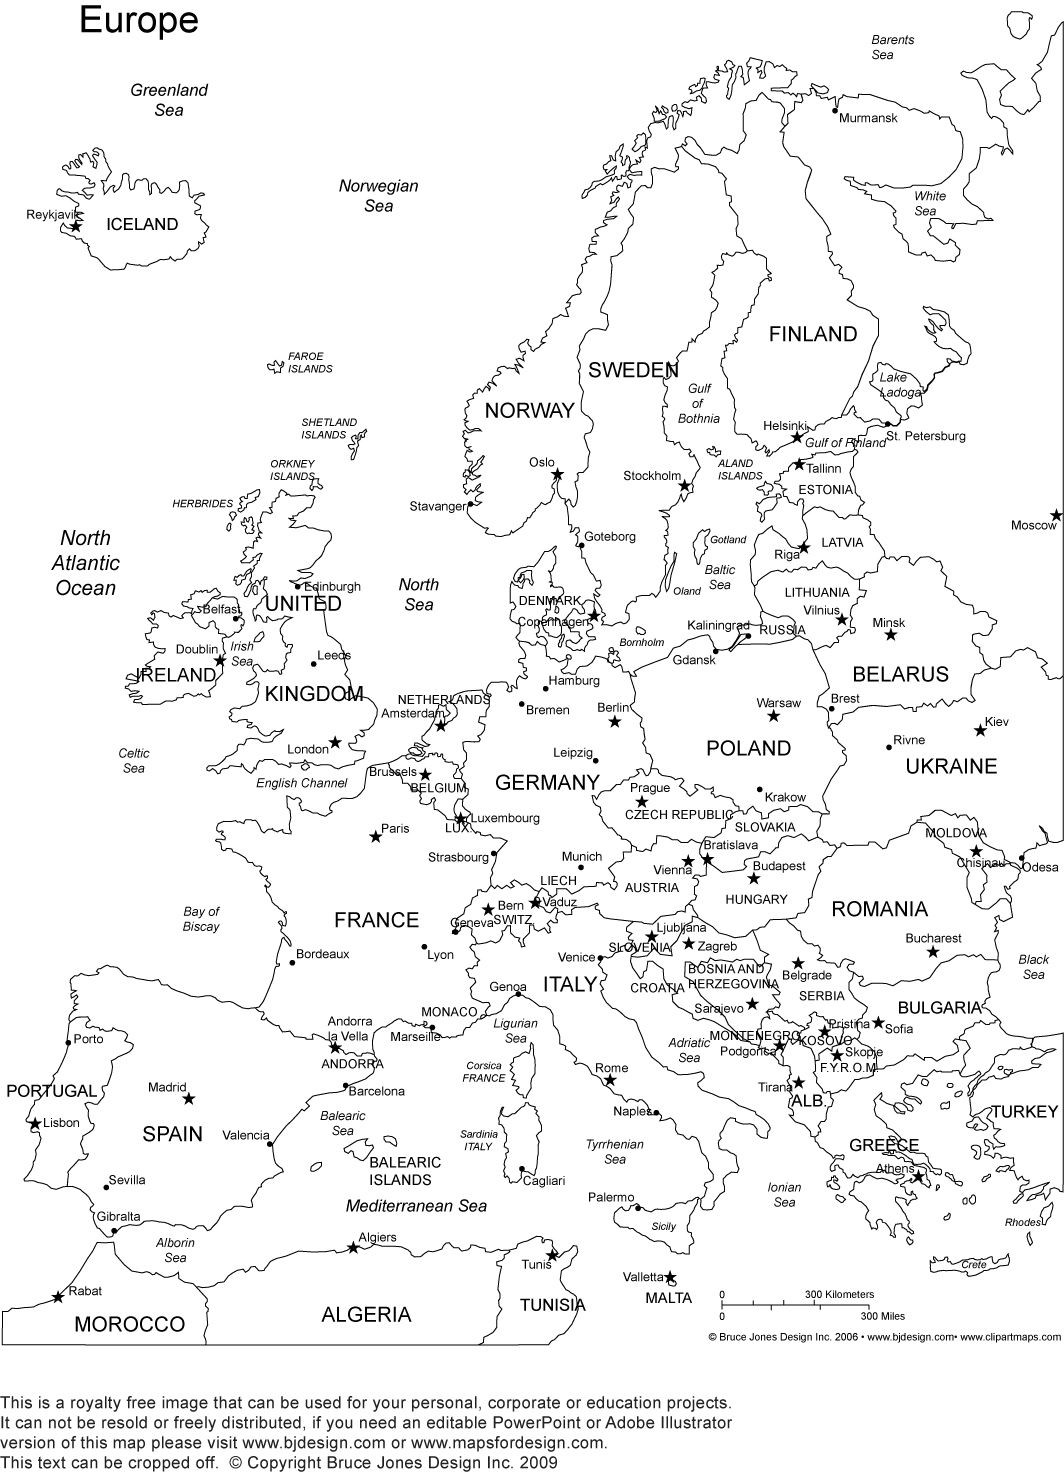 Printable Map Of Europe Best Of Europe Printable Blank Map Royalty Free As Well As Other